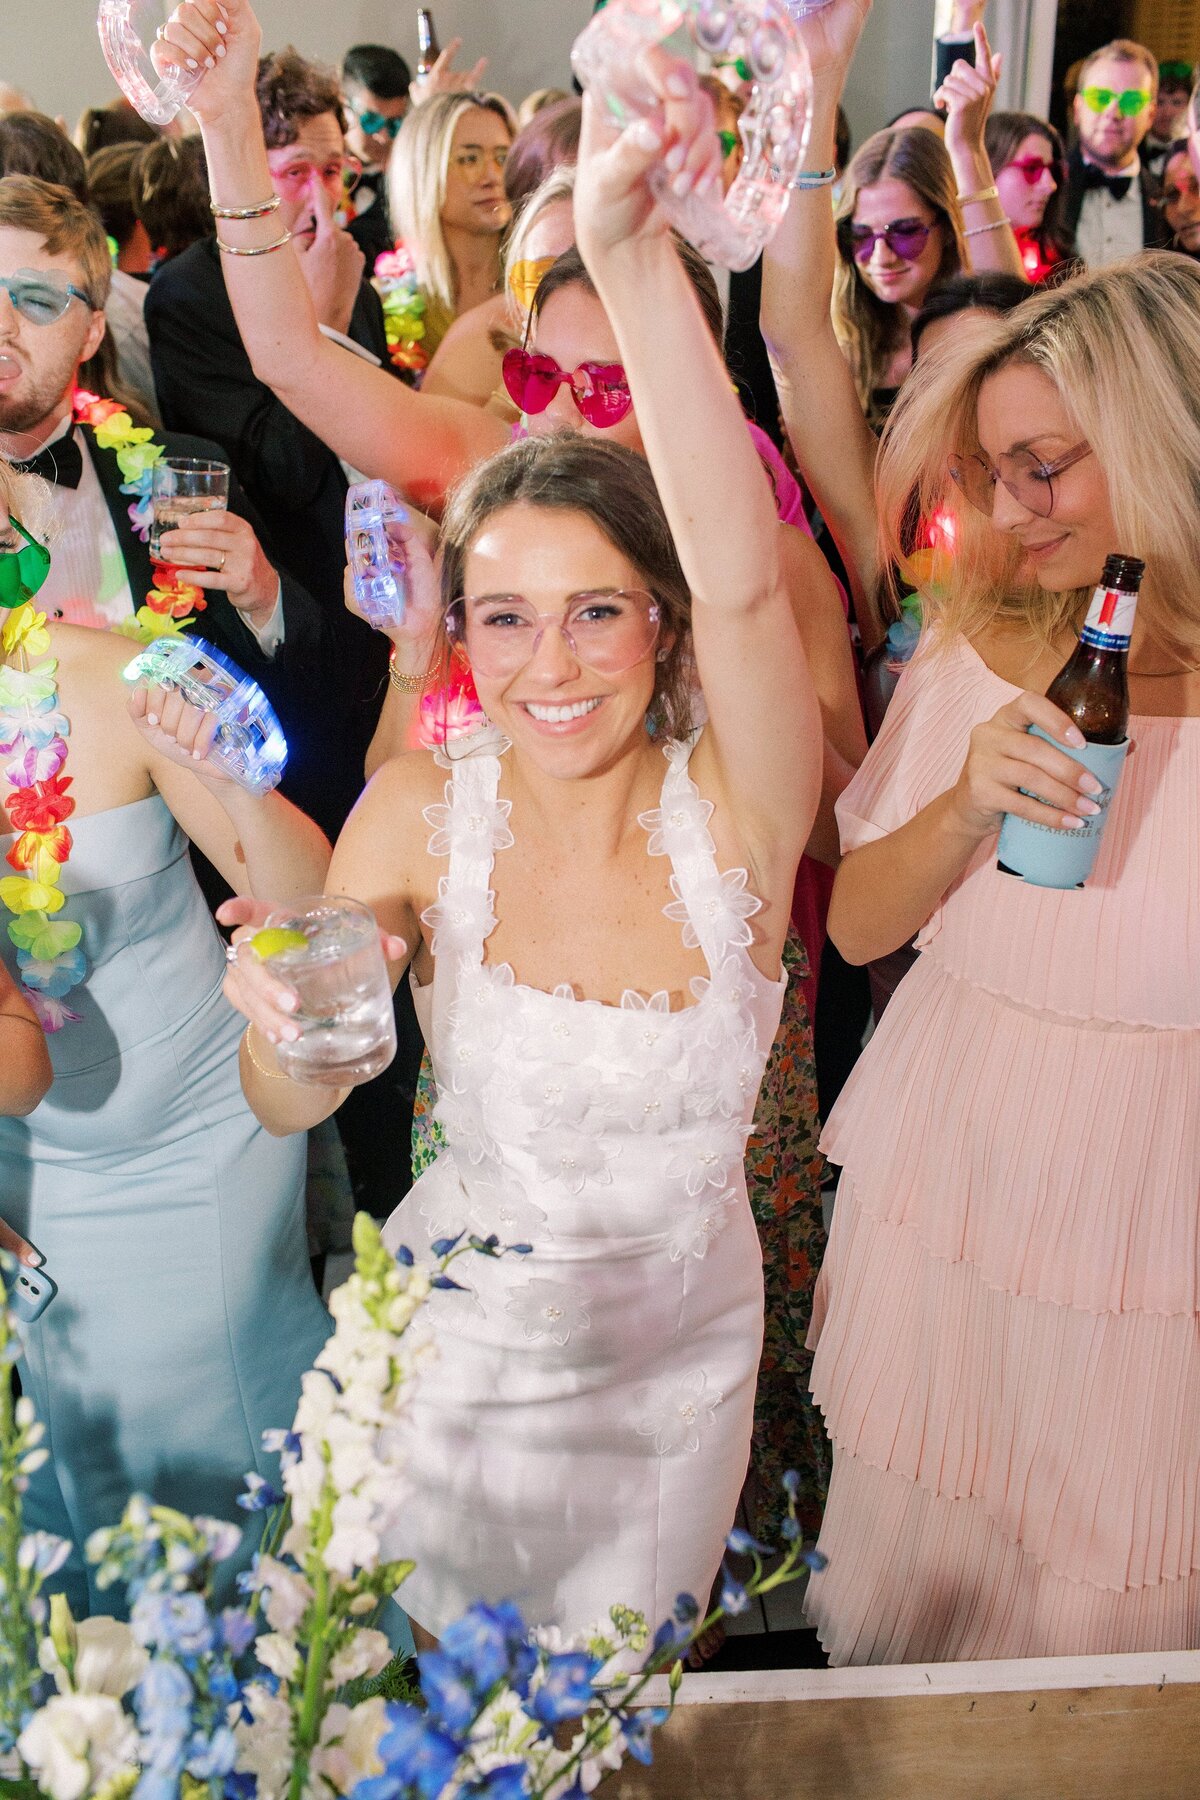 Bride dances with friends at her wedding reception